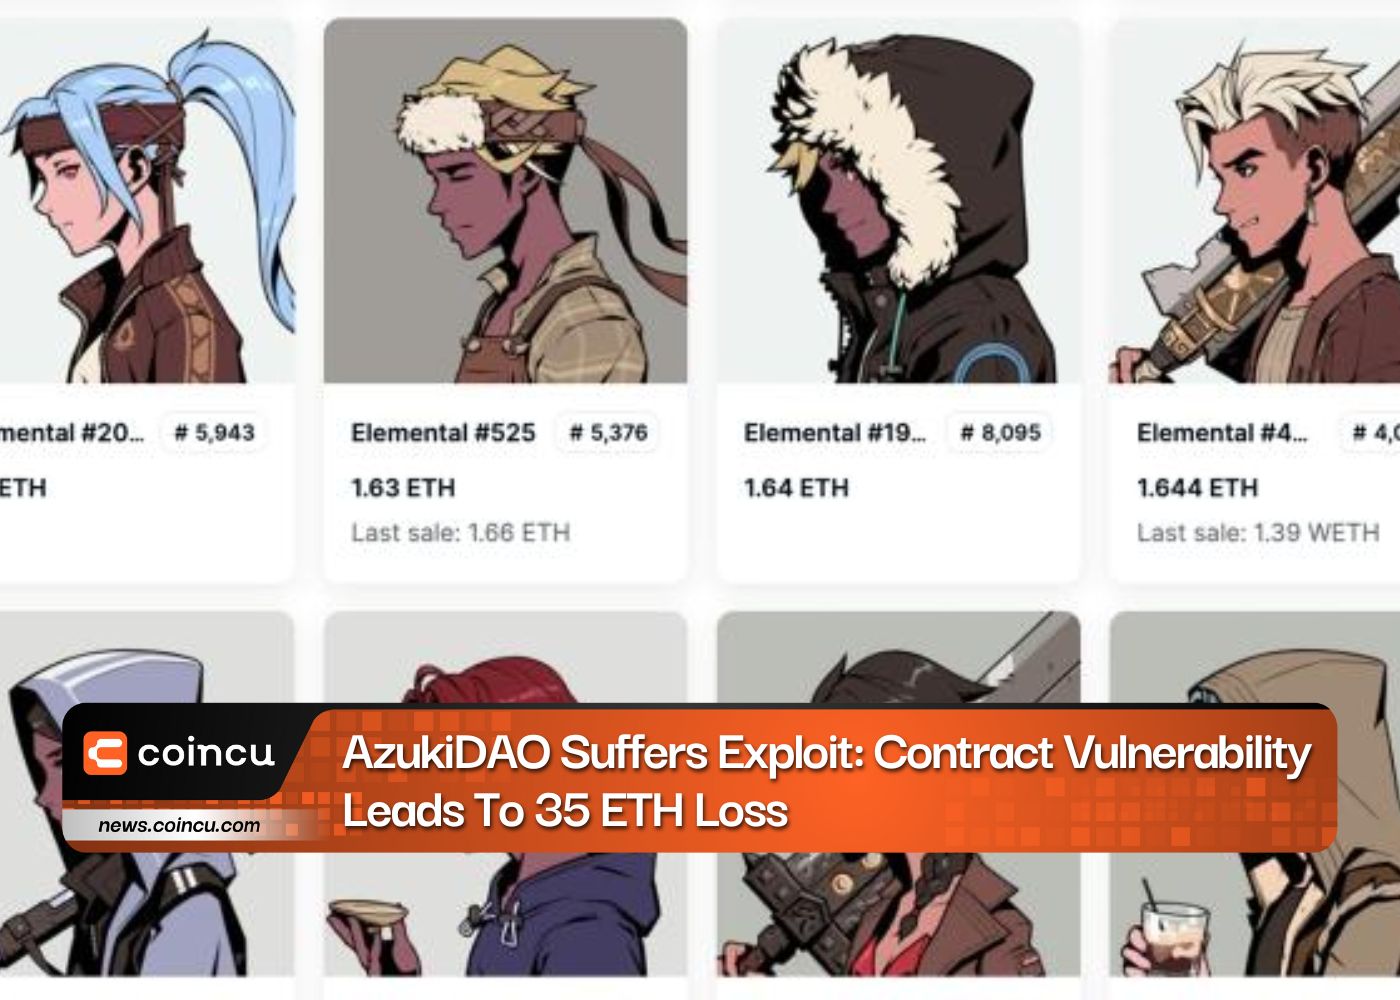 AzukiDAO Suffers Exploit: Contract Vulnerability Leads To 35 ETH Loss